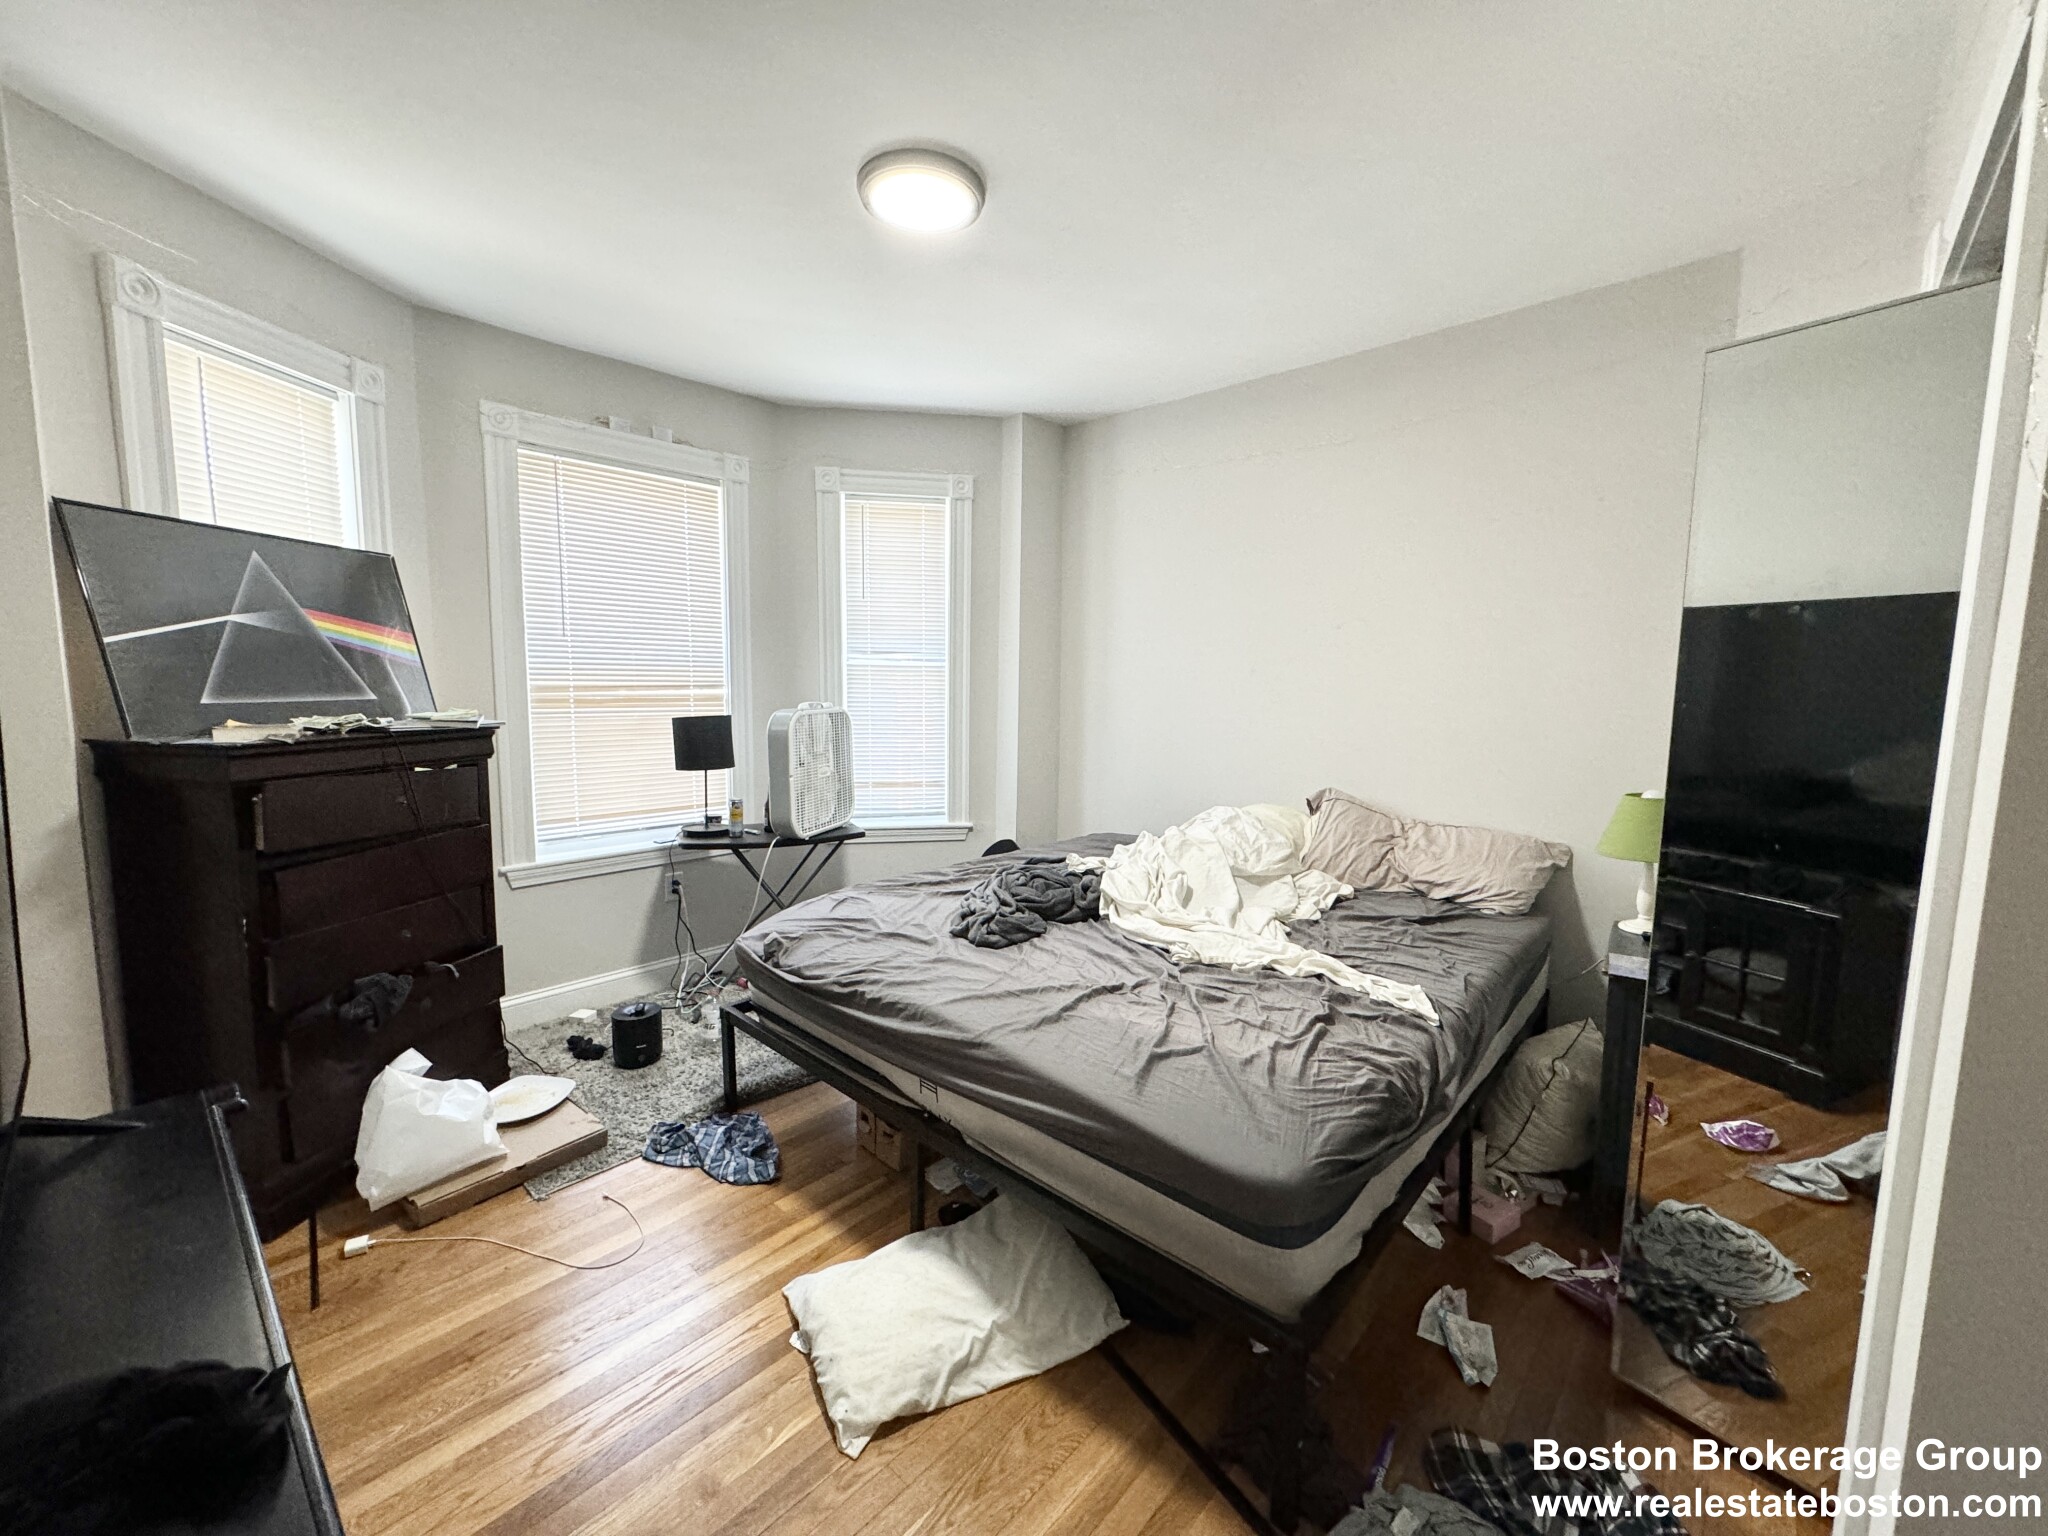 Photos of apartment on Howell St.,Boston MA 02125